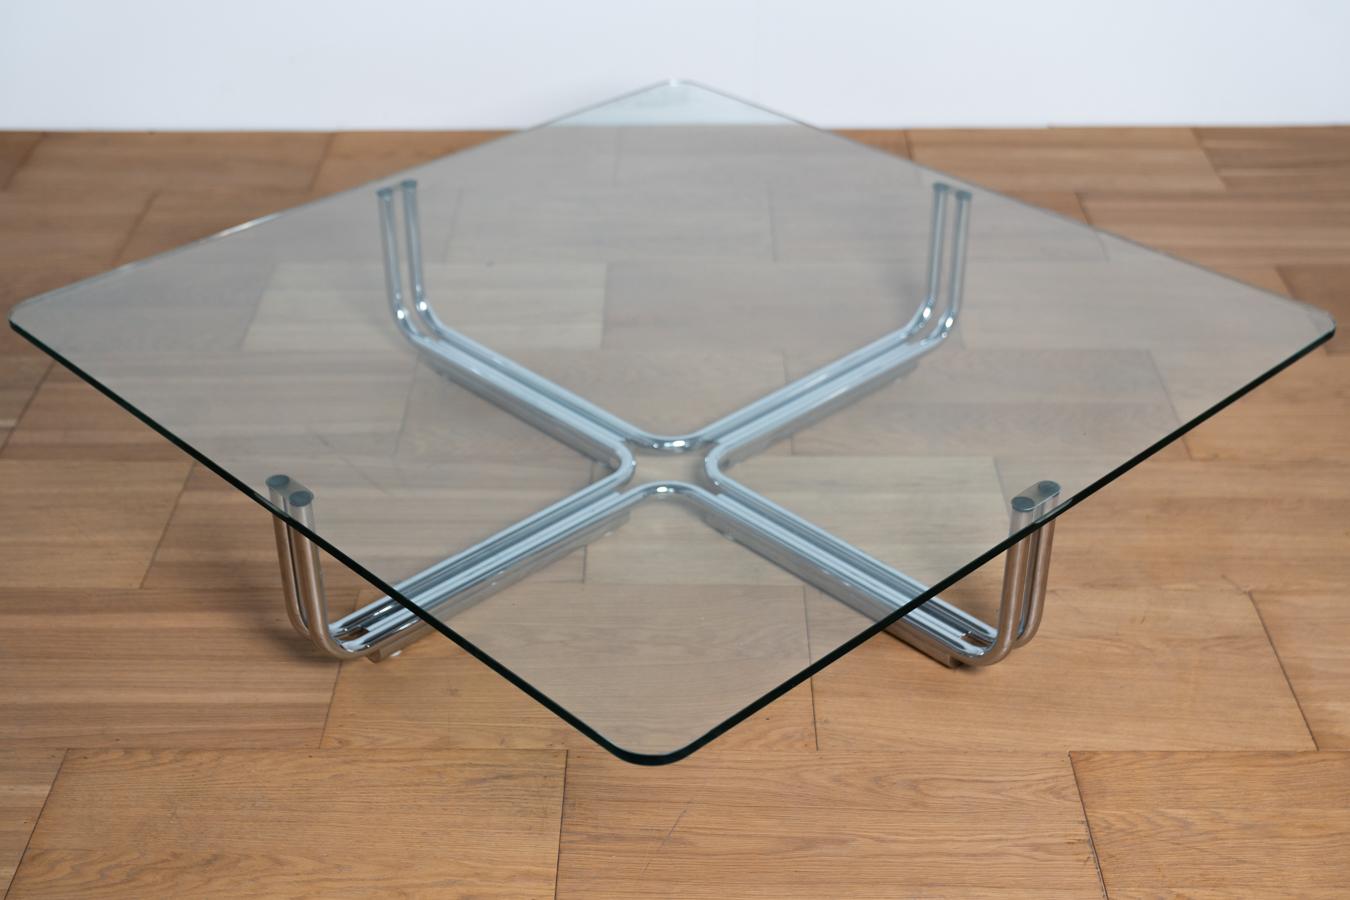 Low crystal coffee table 130 x 130 x 32
Stile Vintage
Periodo del design 1960 - 1969
Periodo di produzione 1960 - 1969
Year of manufacture 1960
Country of production Italy
Creator Frattini, Gianfranco
Manufacturer Cassina
Attribution Mark This piece